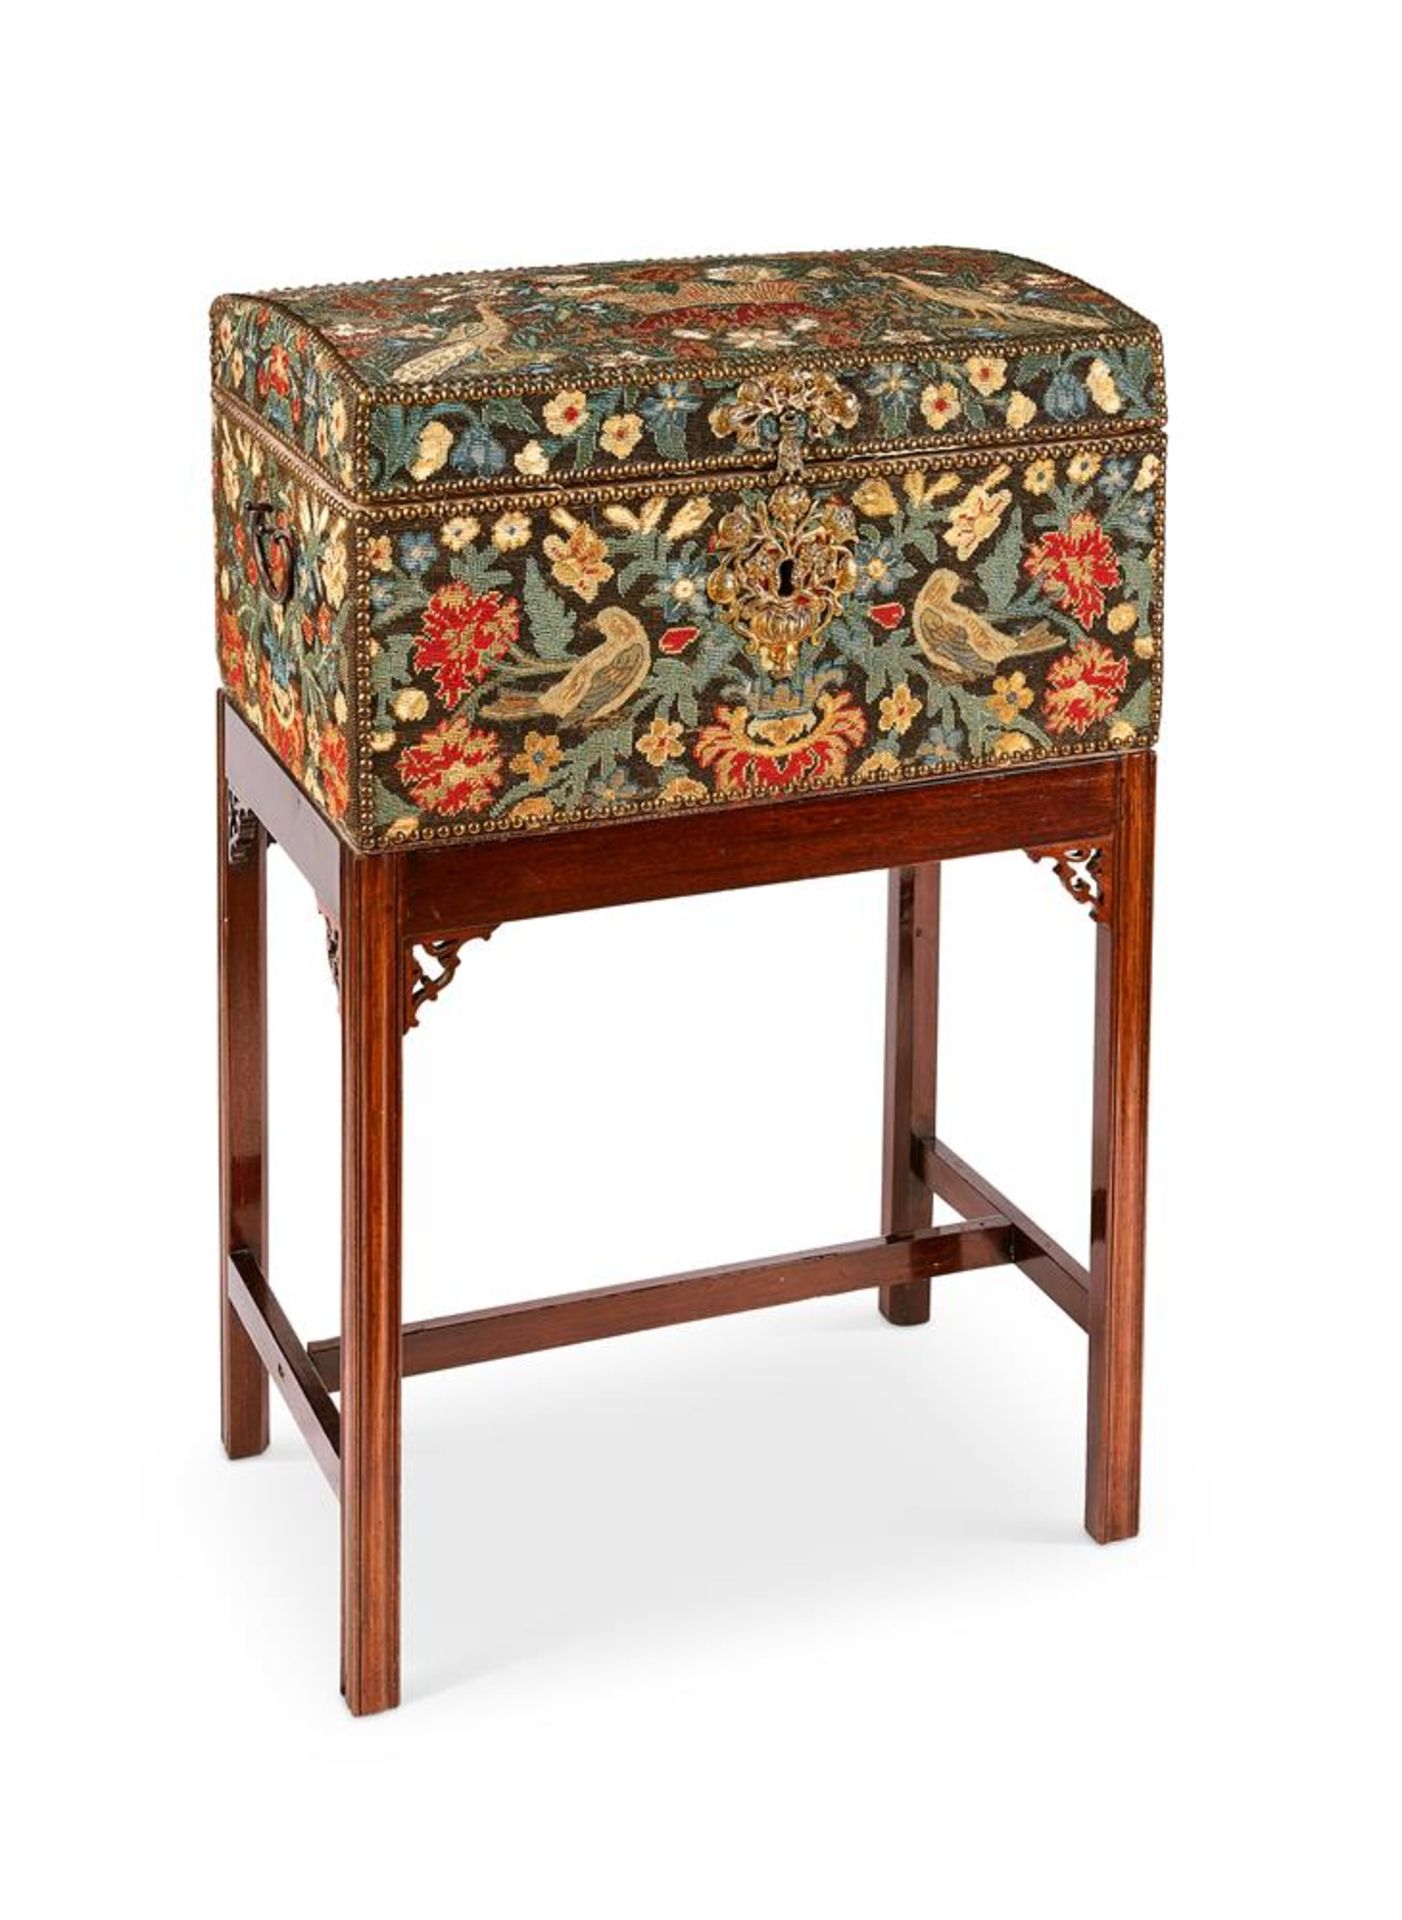 A GEORGE I GROS AND PETIT POINT NEEDLEWORK DOMED COFFER ON LATER STAND CIRCA 1720